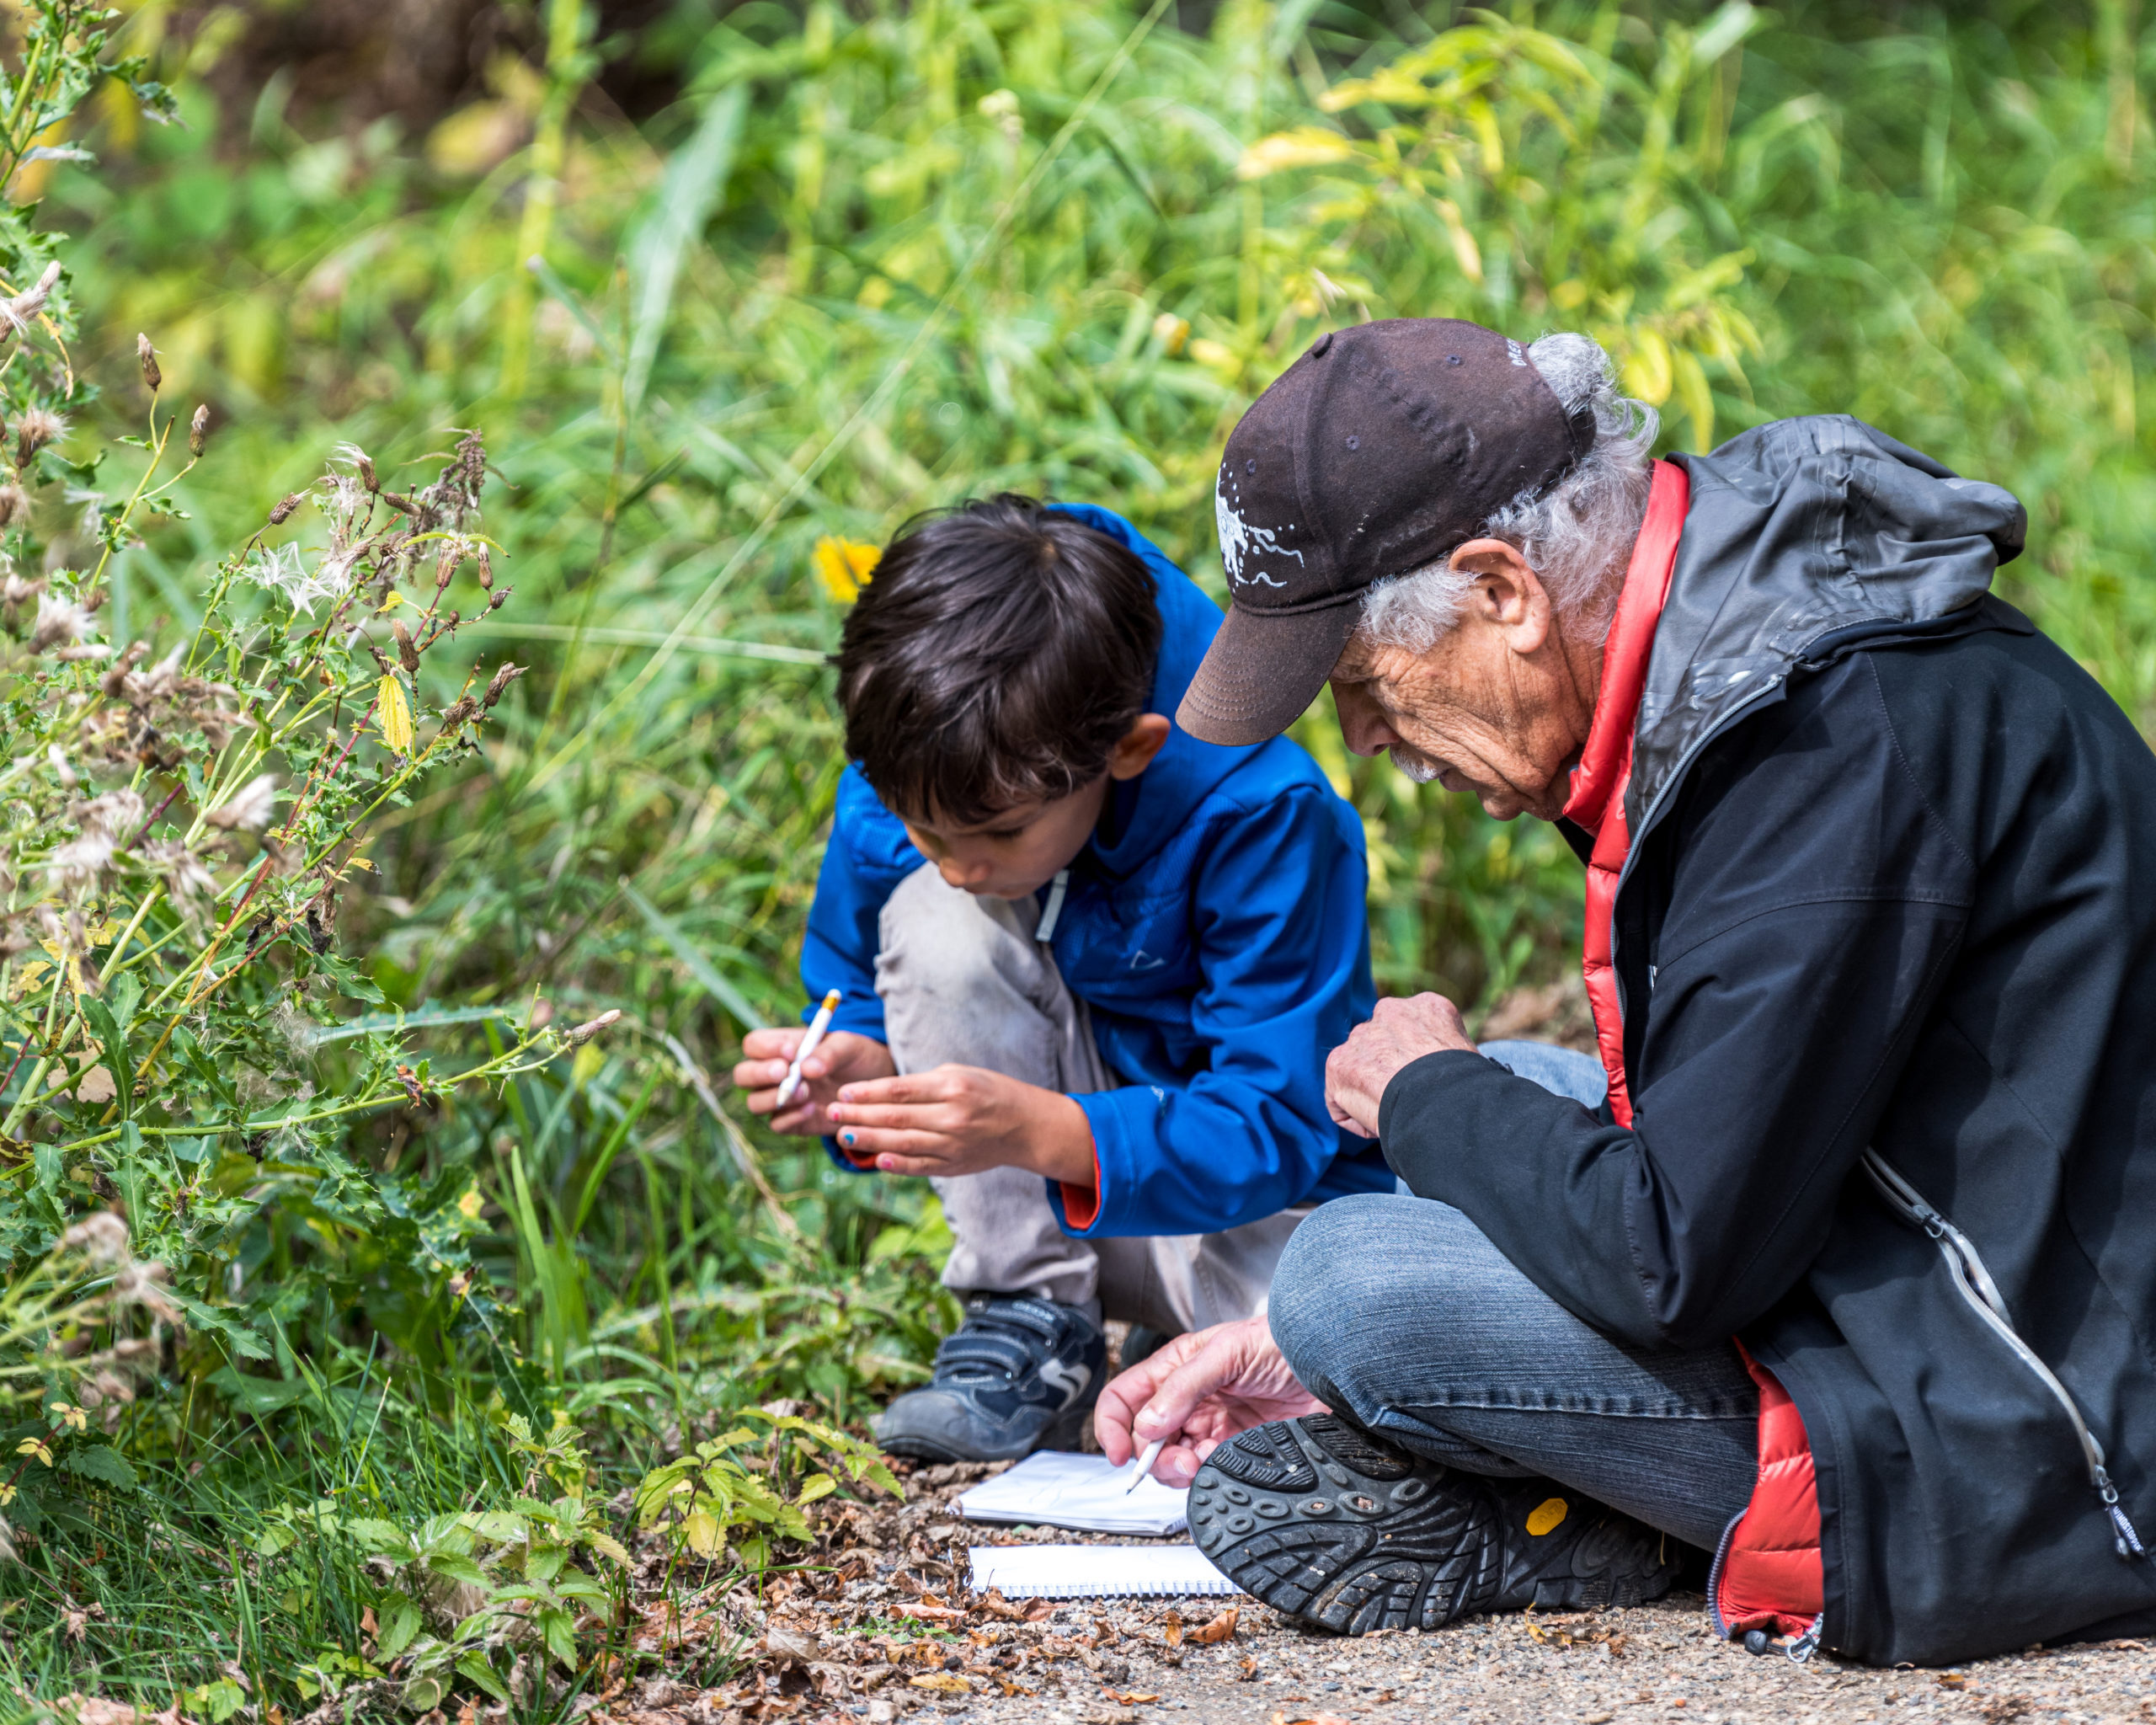 Image of a boy and an elderly man sketching nature together